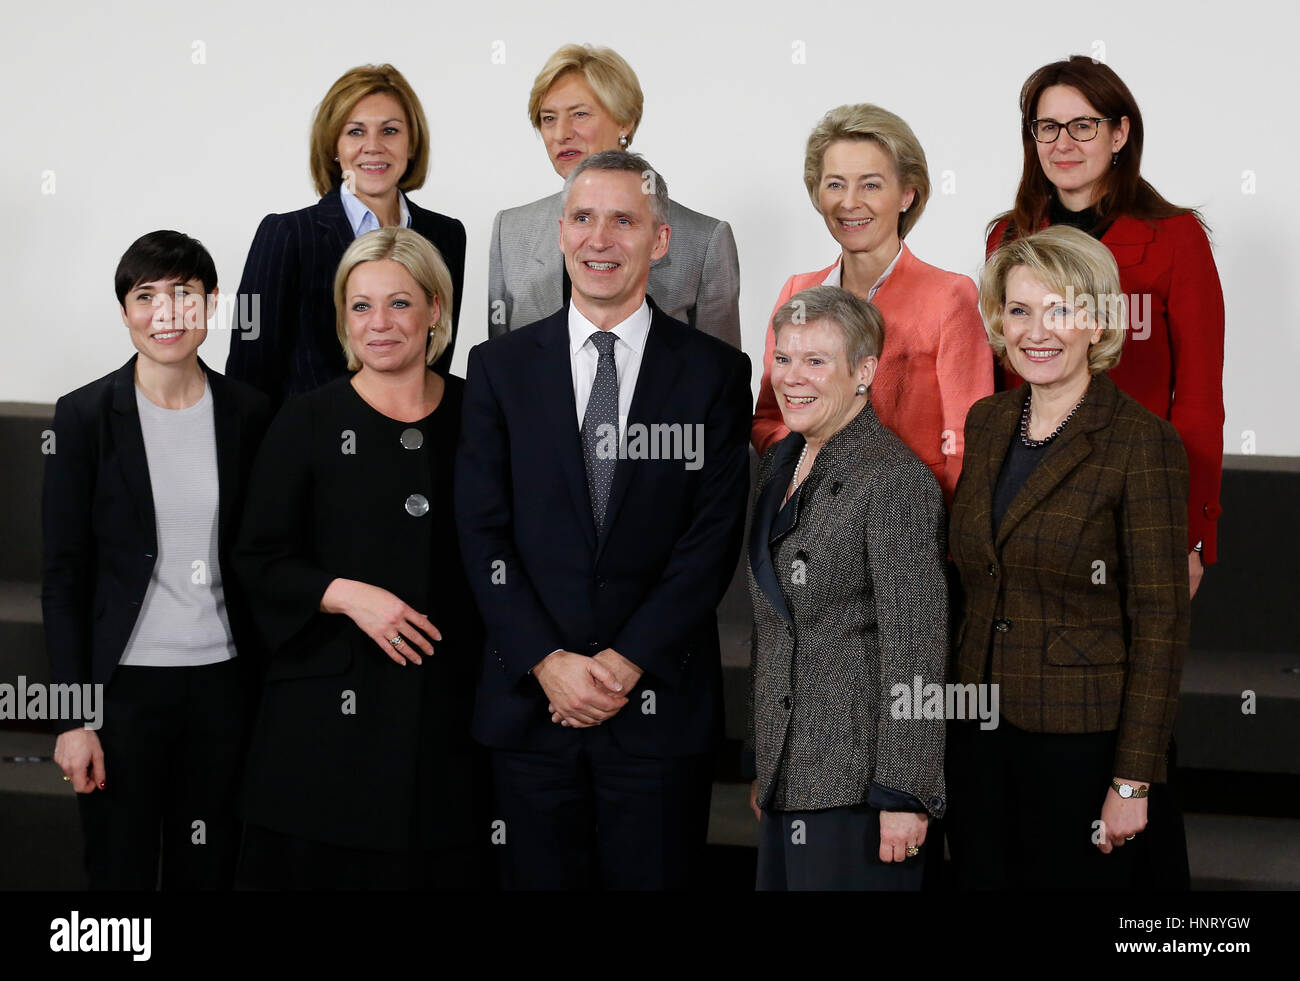 (170215) -- BRUSSELS, Feb. 15, 2017 (Xinhua) -- Norwegian Defense Minister Ine Eriksen Soreide, Dutch Defense Minister Jeanine Hennis-Plasschaert, NATO Secretary General Jens Stoltenberg, NATO Deputy Secretary General Rose Gottemoeller and Albanian Defense Minister Mimi Kodheli (L-R, front), Spanish Defense Minister Maria Dolores de Cospedal, Italian Defense Minister Roberta Pinotti, German Defense Minister Ursula von der Leyen and Slovenian Defense Minister Andreja Katic (L-R, rear) pose for a photograph during a NATO Defense Ministers meeting at its headquarters in Brussels, Belgium, on Feb. Stock Photo